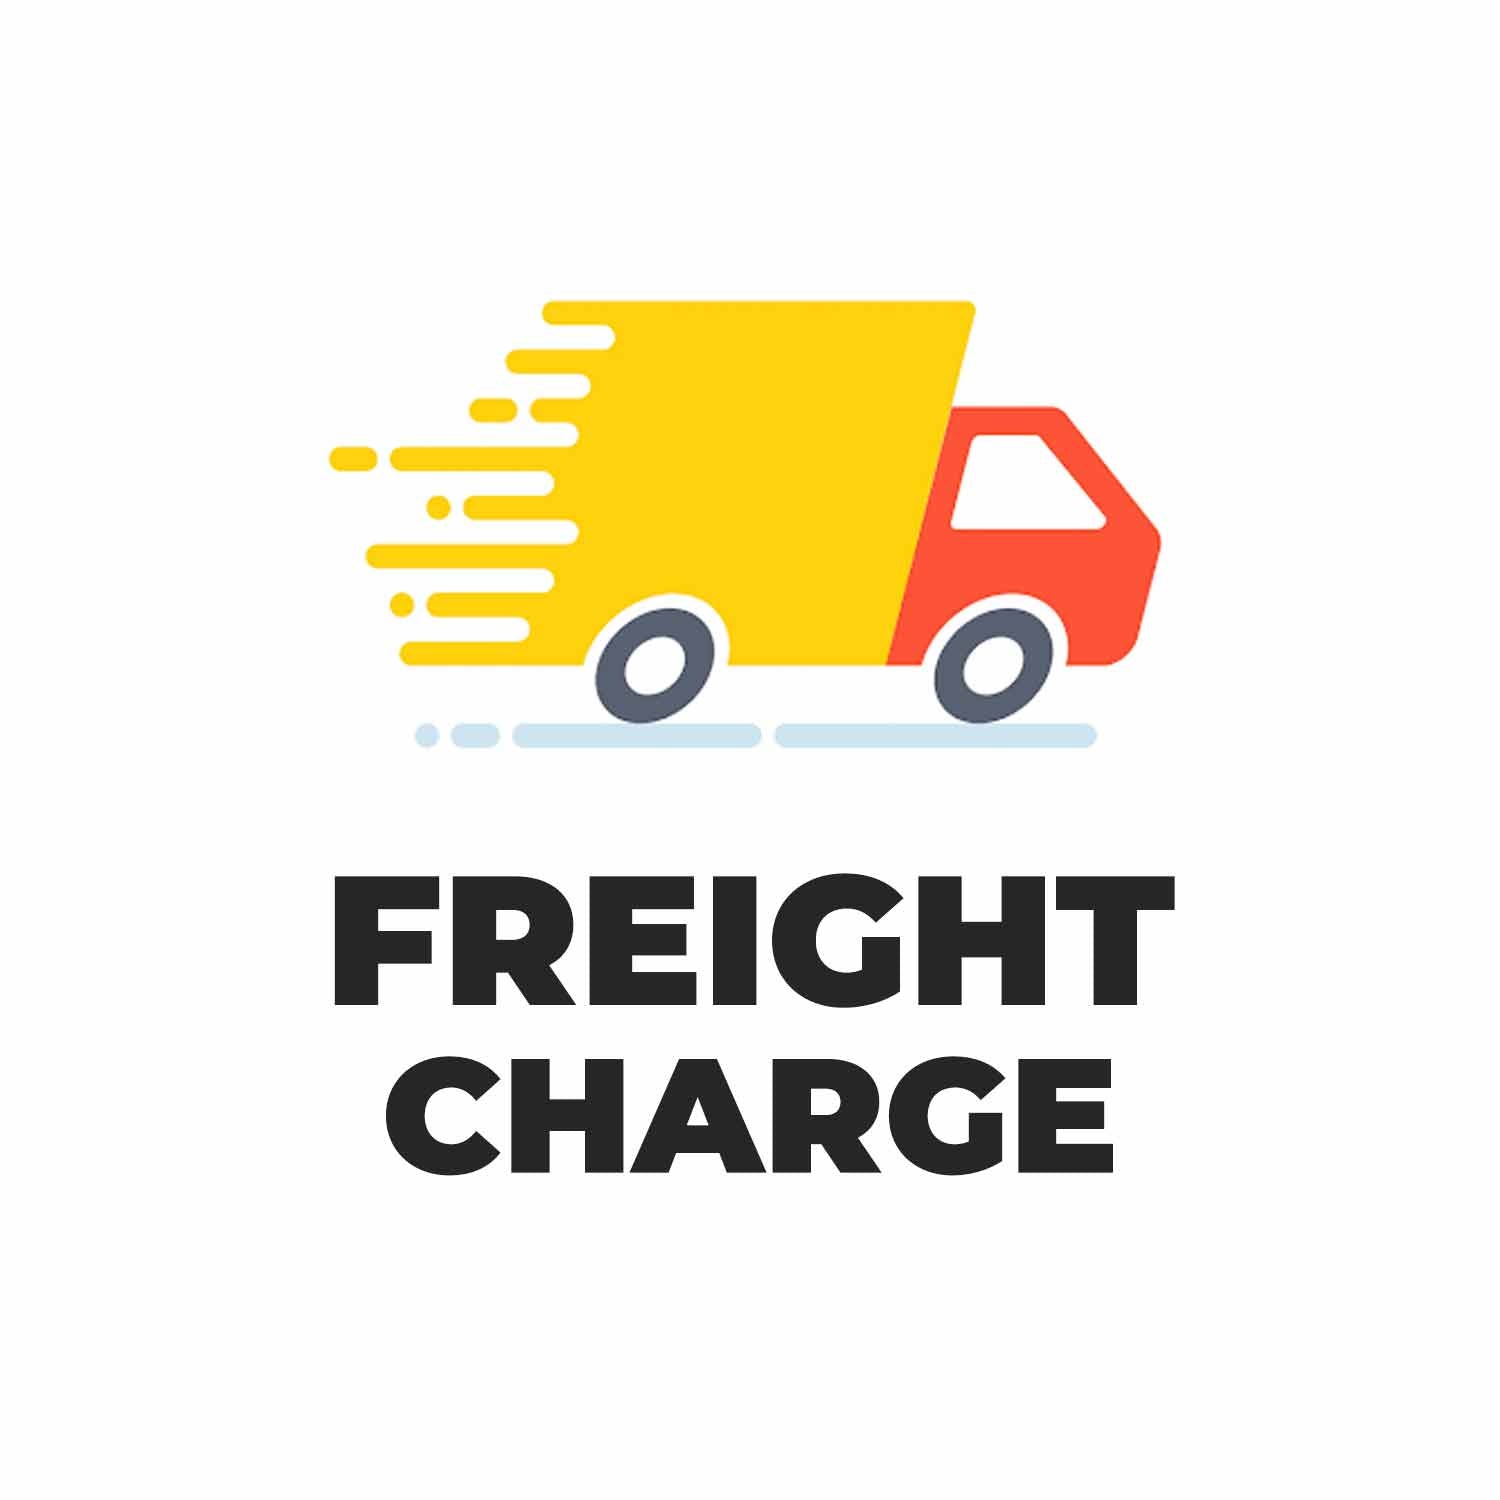 Freight Charge